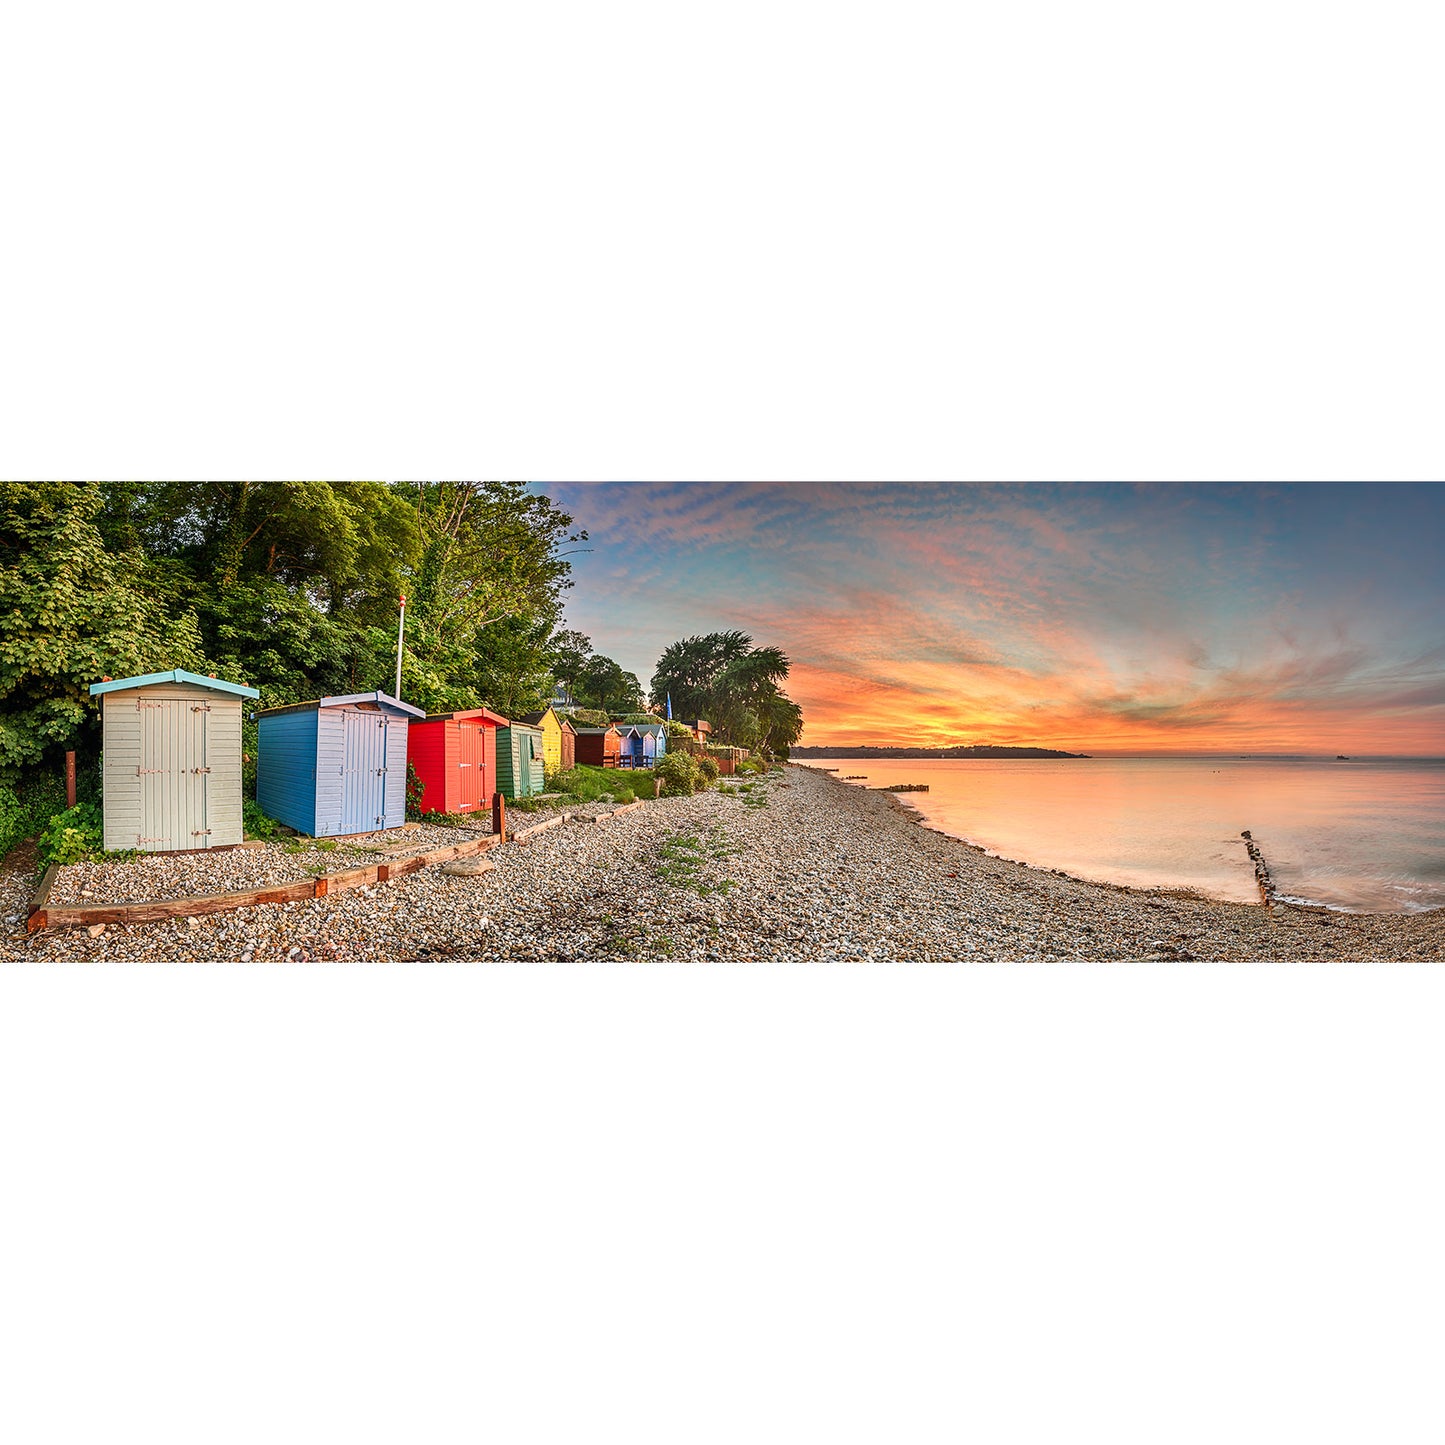 Colorful Bembridge Beach huts line a pebbly shore at sunset on the Isle of Wight captured by Available Light Photography.